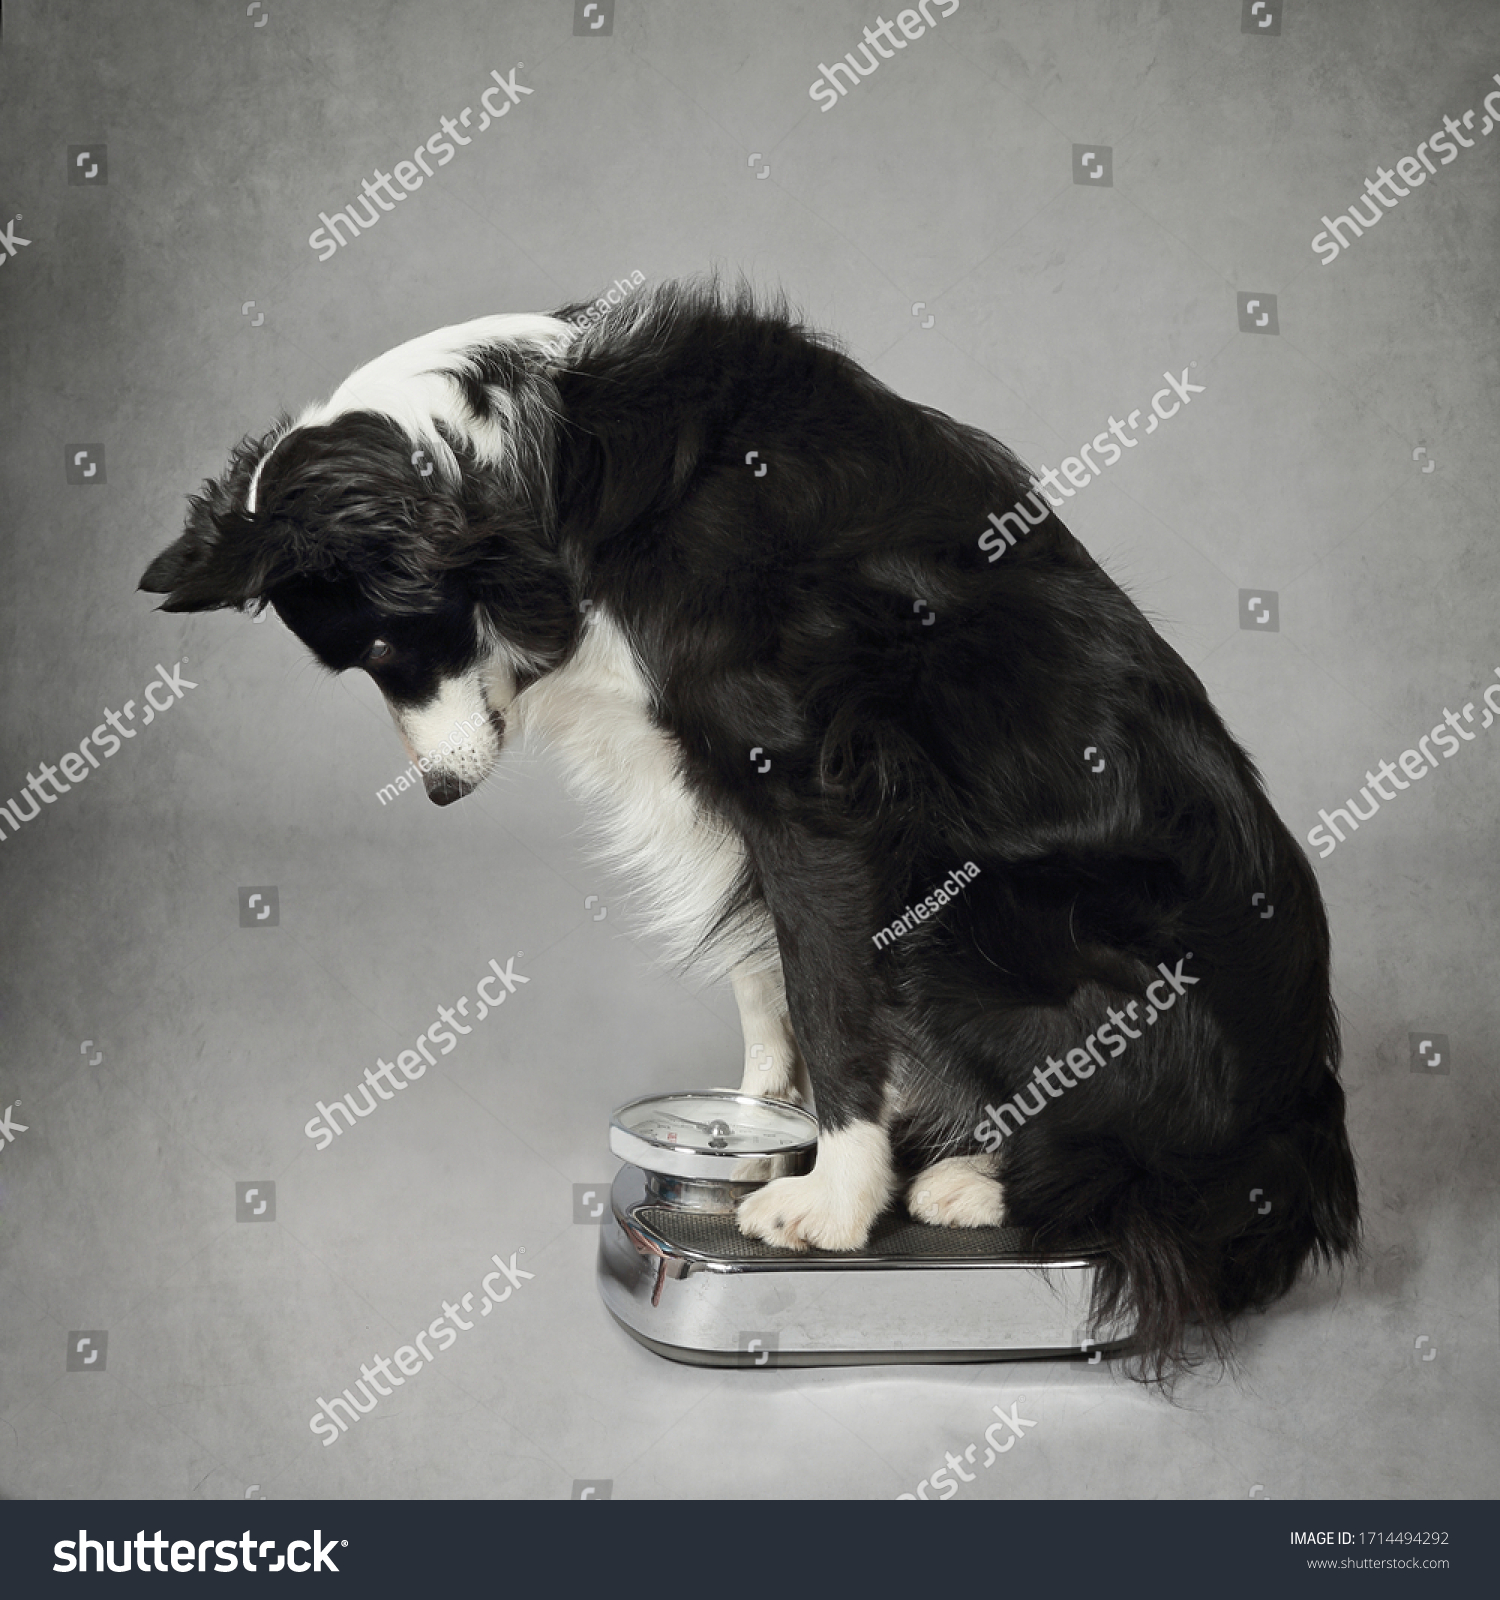 beautiful purebred border collie dog weighing on a bathroom scale on gray background #1714494292